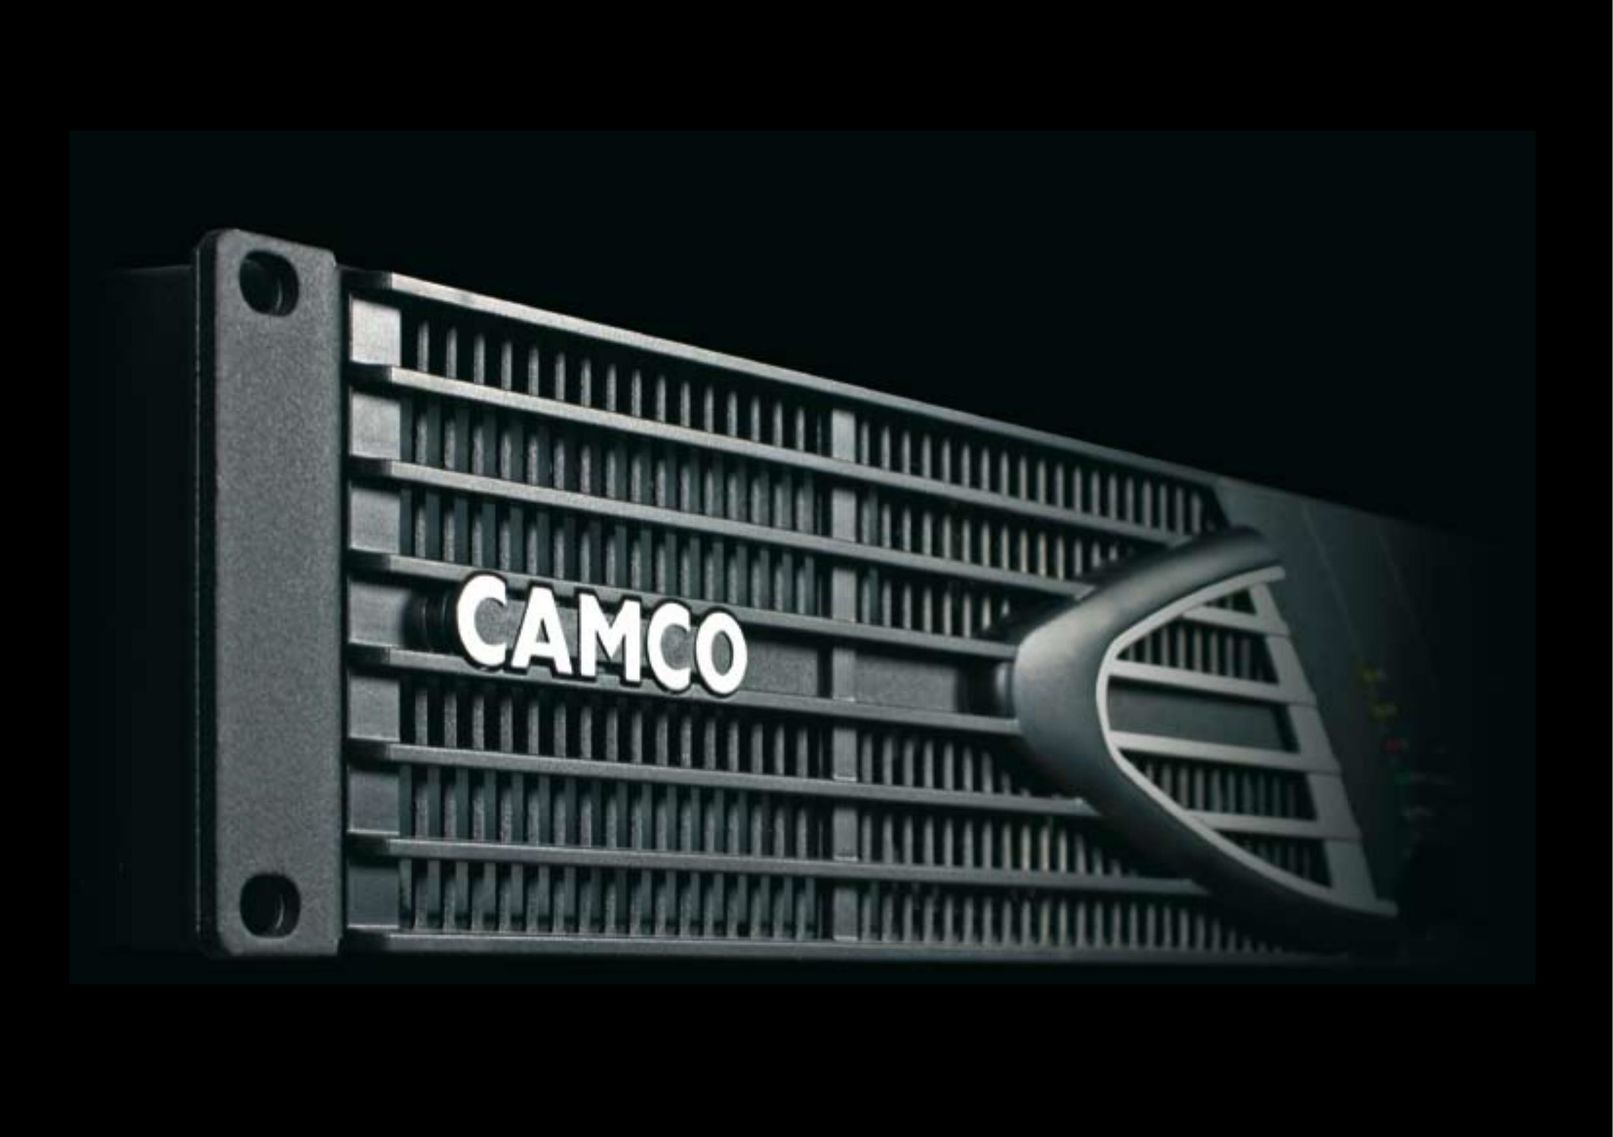 Camco P.0 Series Stereo Amplifier User Manual